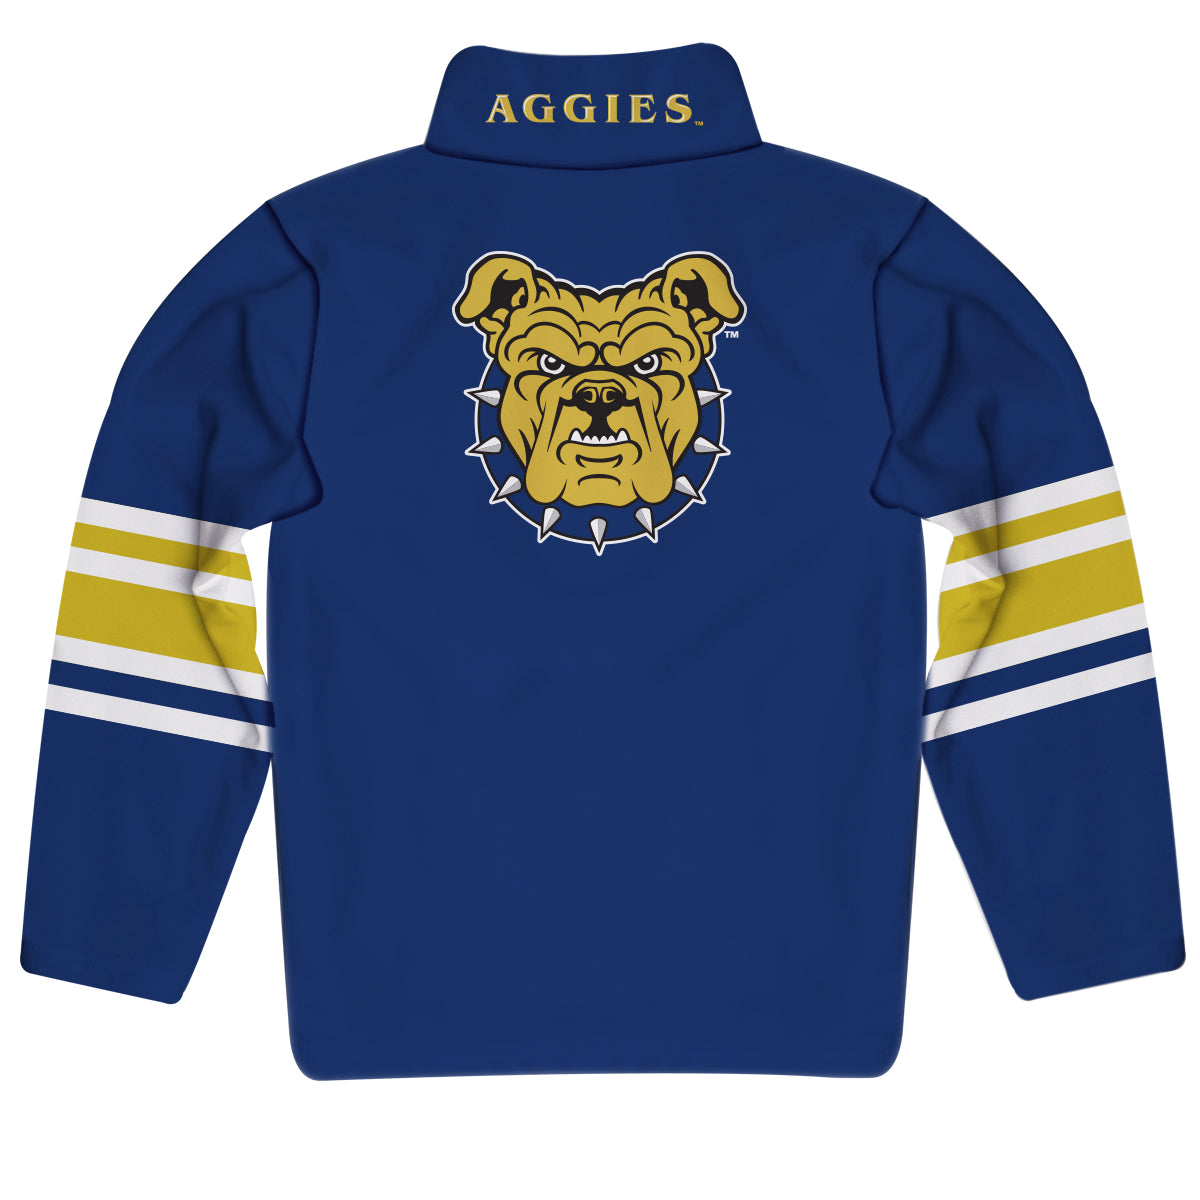 North Carolina A&T Aggies Game Day Gold Quarter Zip Pullover for Infants Toddlers by Vive La Fete